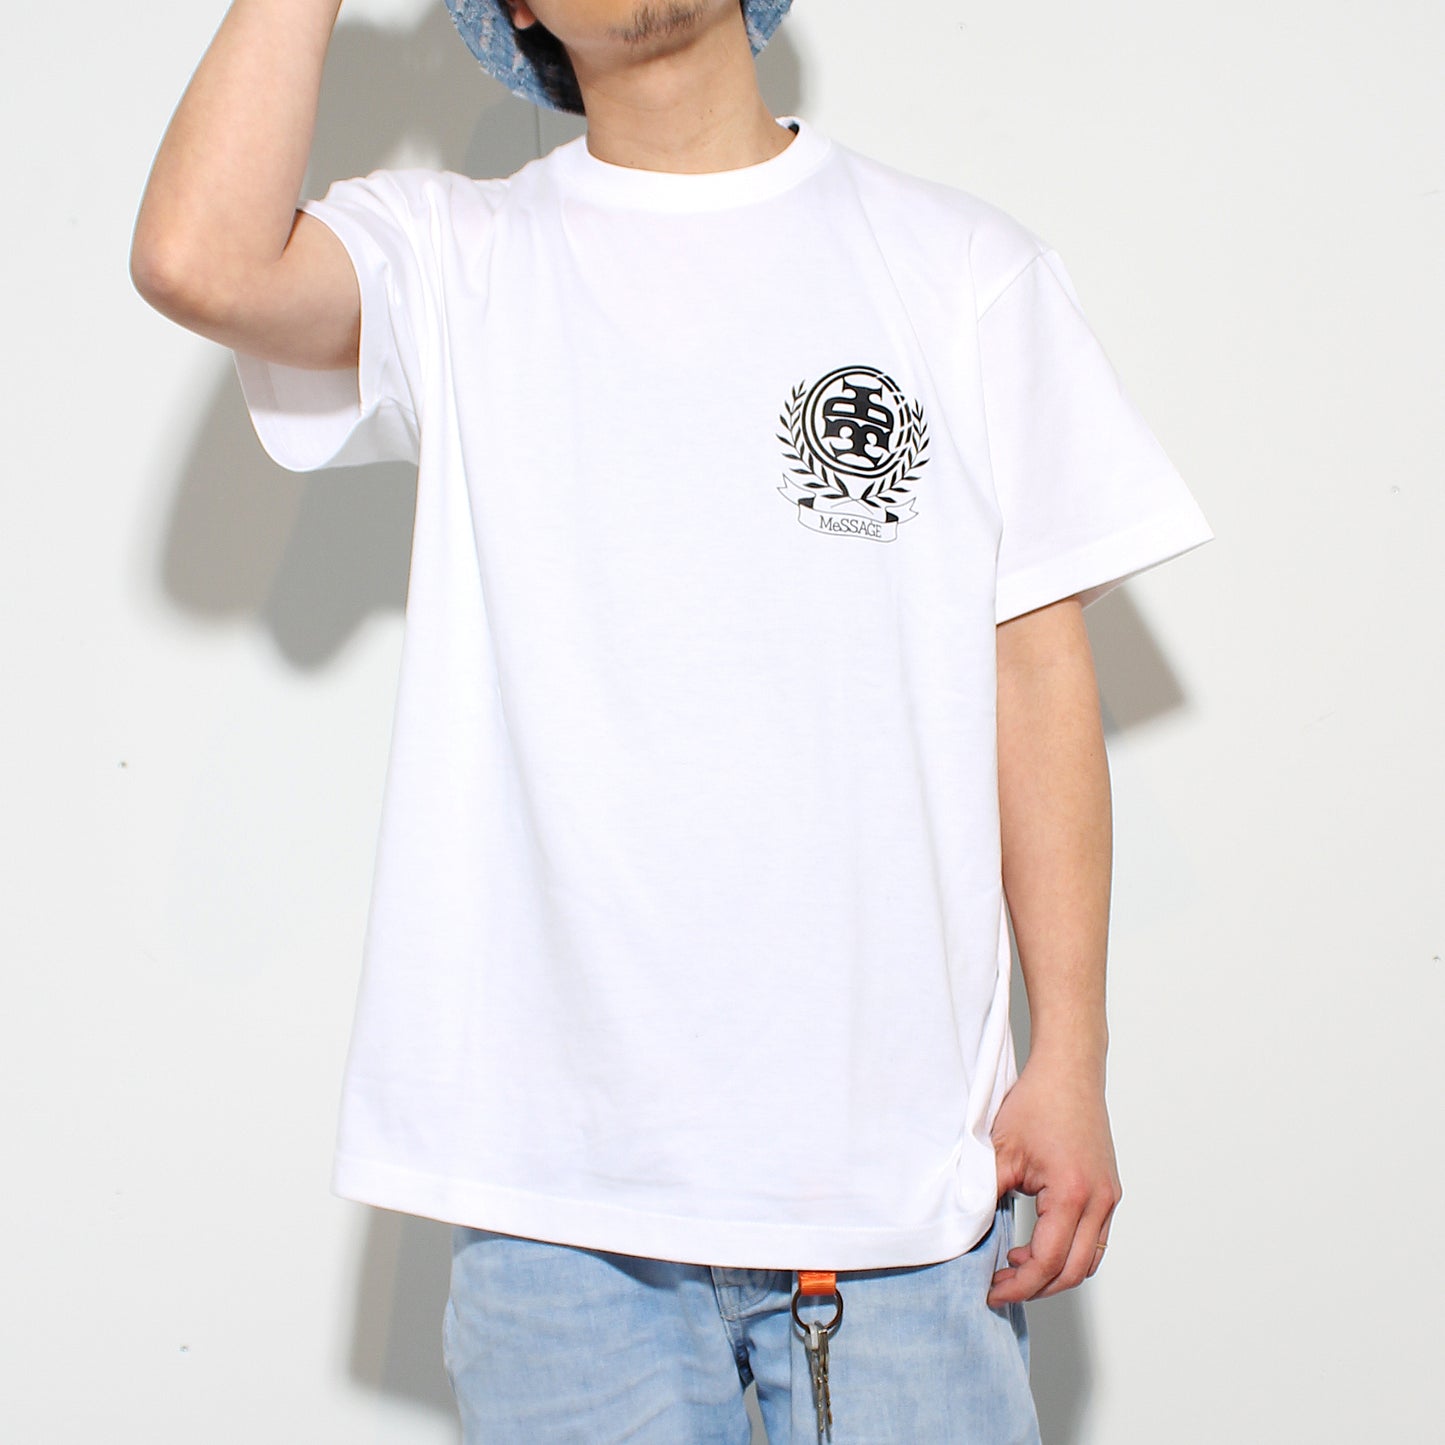 【Me'SSAGE】Night Indian S/S